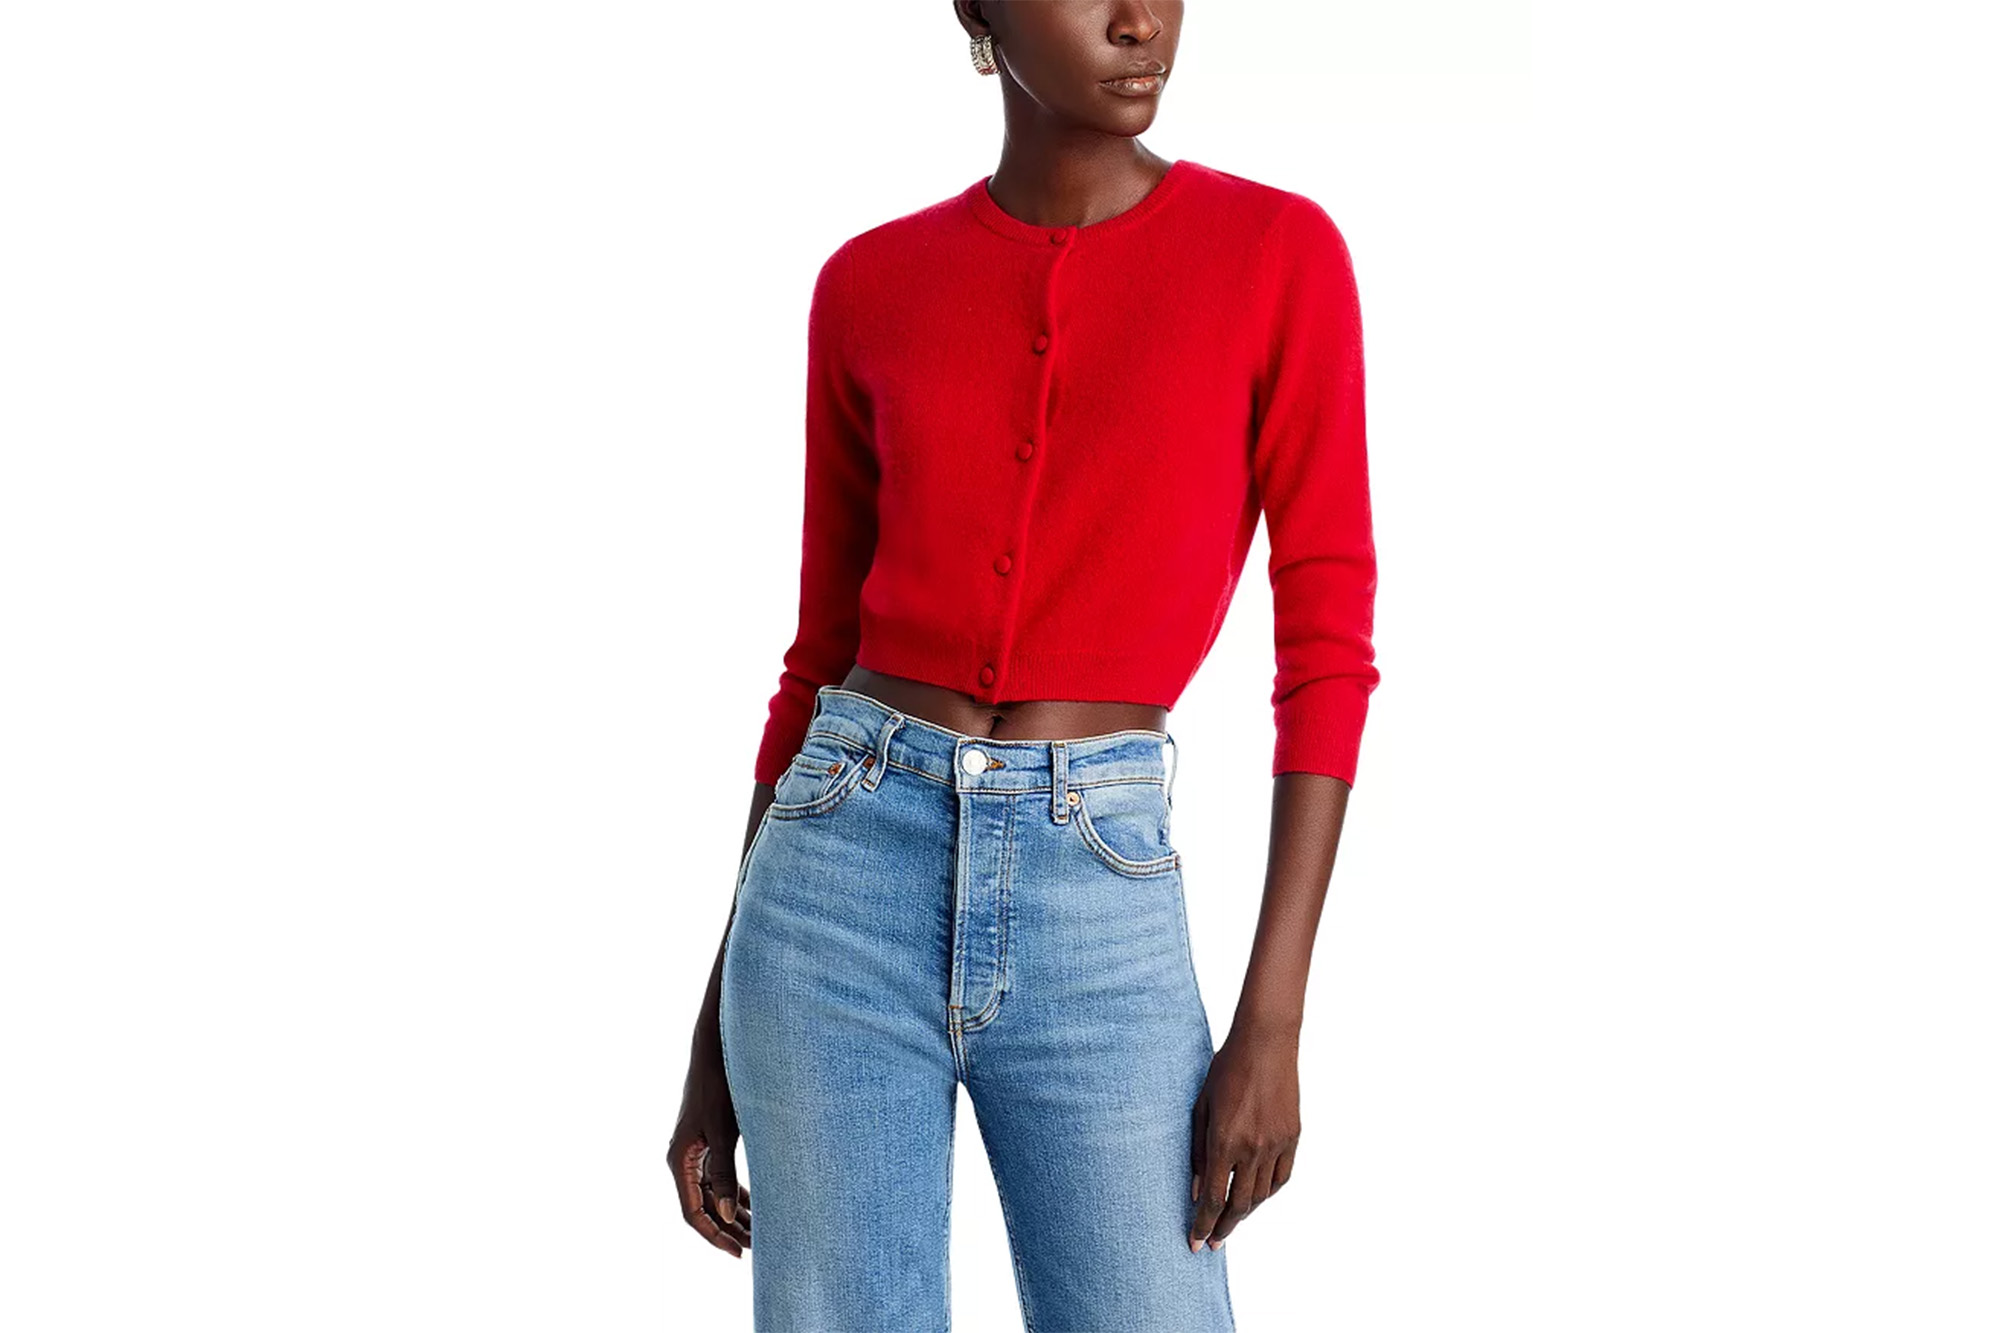 A model in a red cardigan and jeans